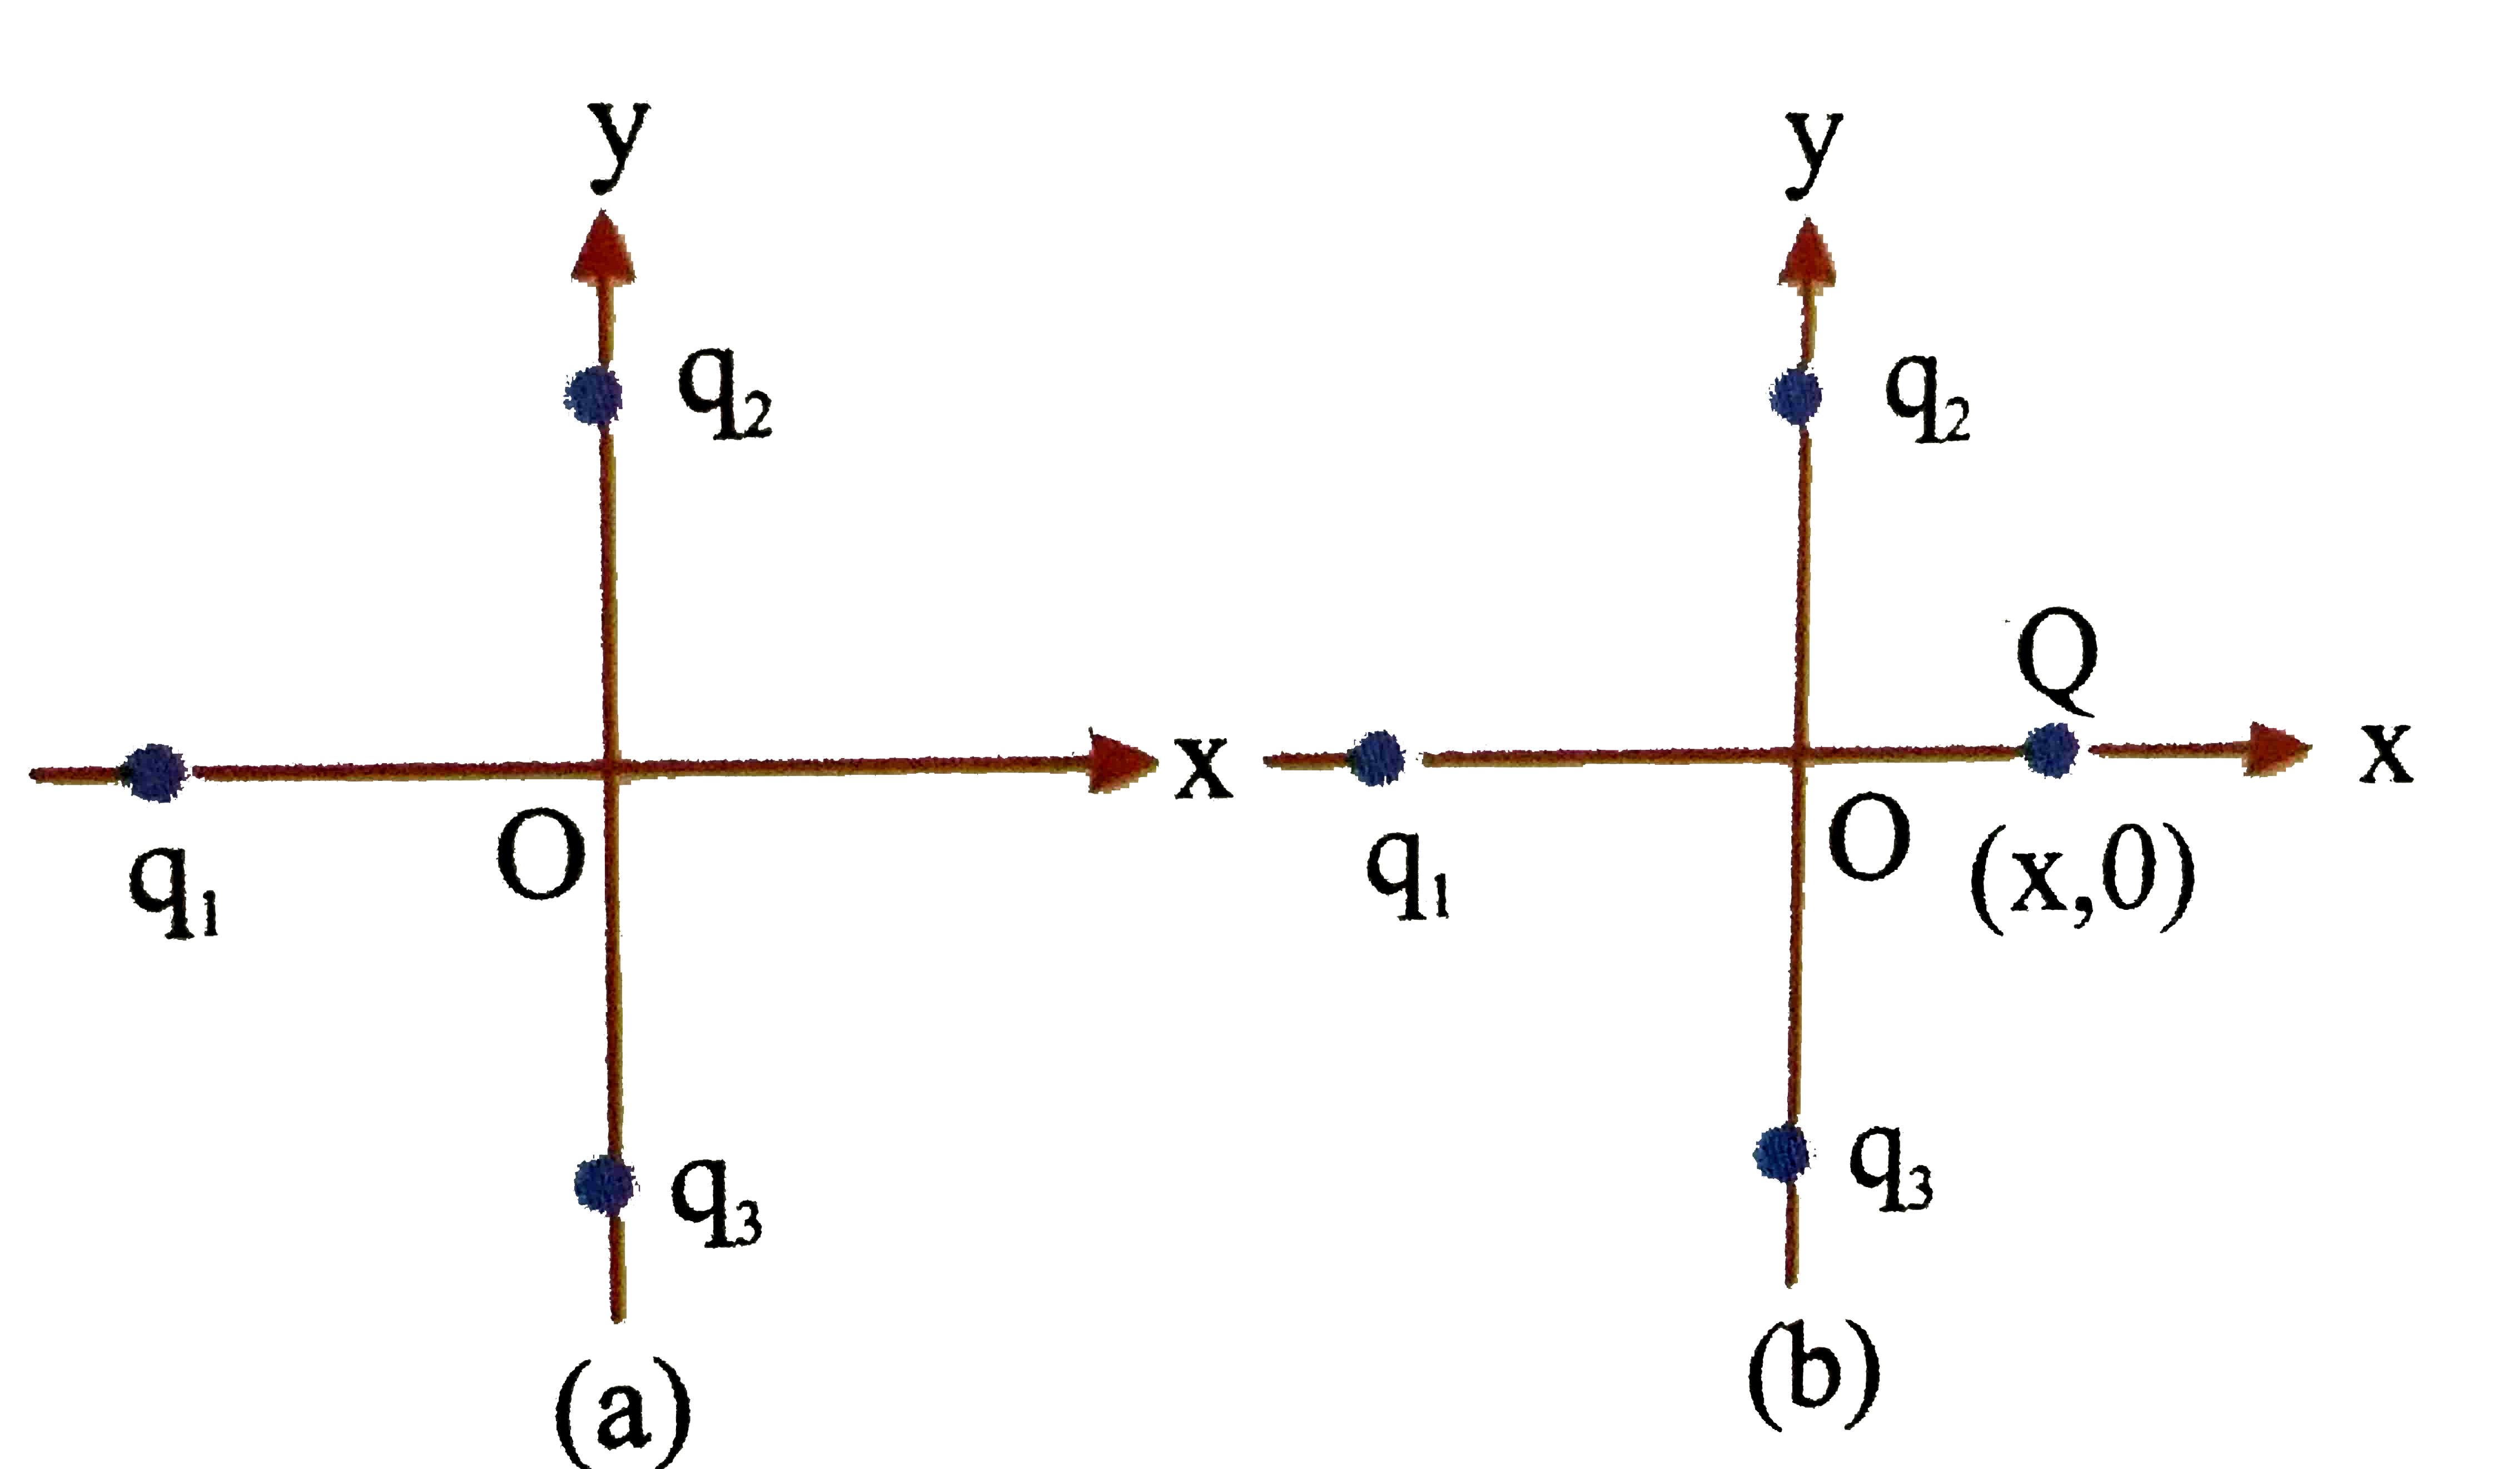 In figure two positive charges q(2) and q(3) fixed along the y-axis ,exert a net electric force in the +x direction on a charge q(1) fixed along the x-axis if a positive charge Q is  added at (x,0) the force on q(1)